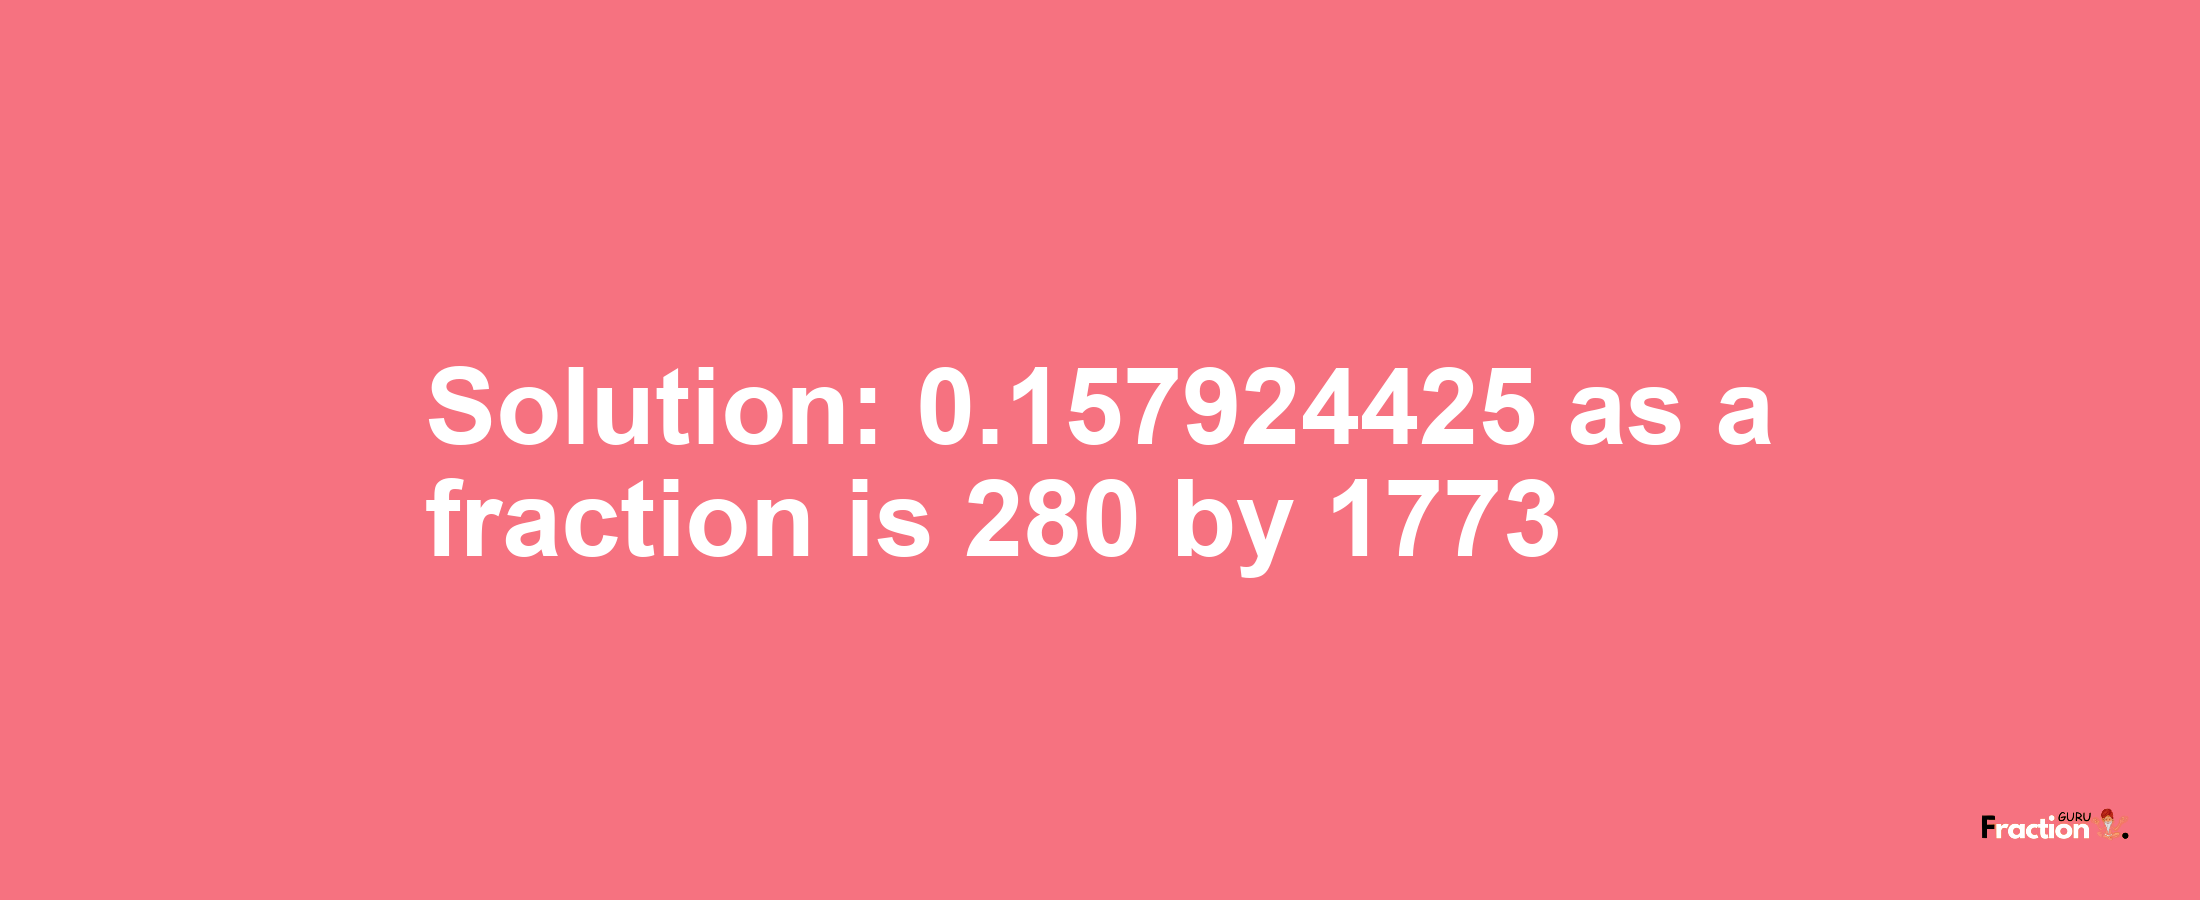 Solution:0.157924425 as a fraction is 280/1773